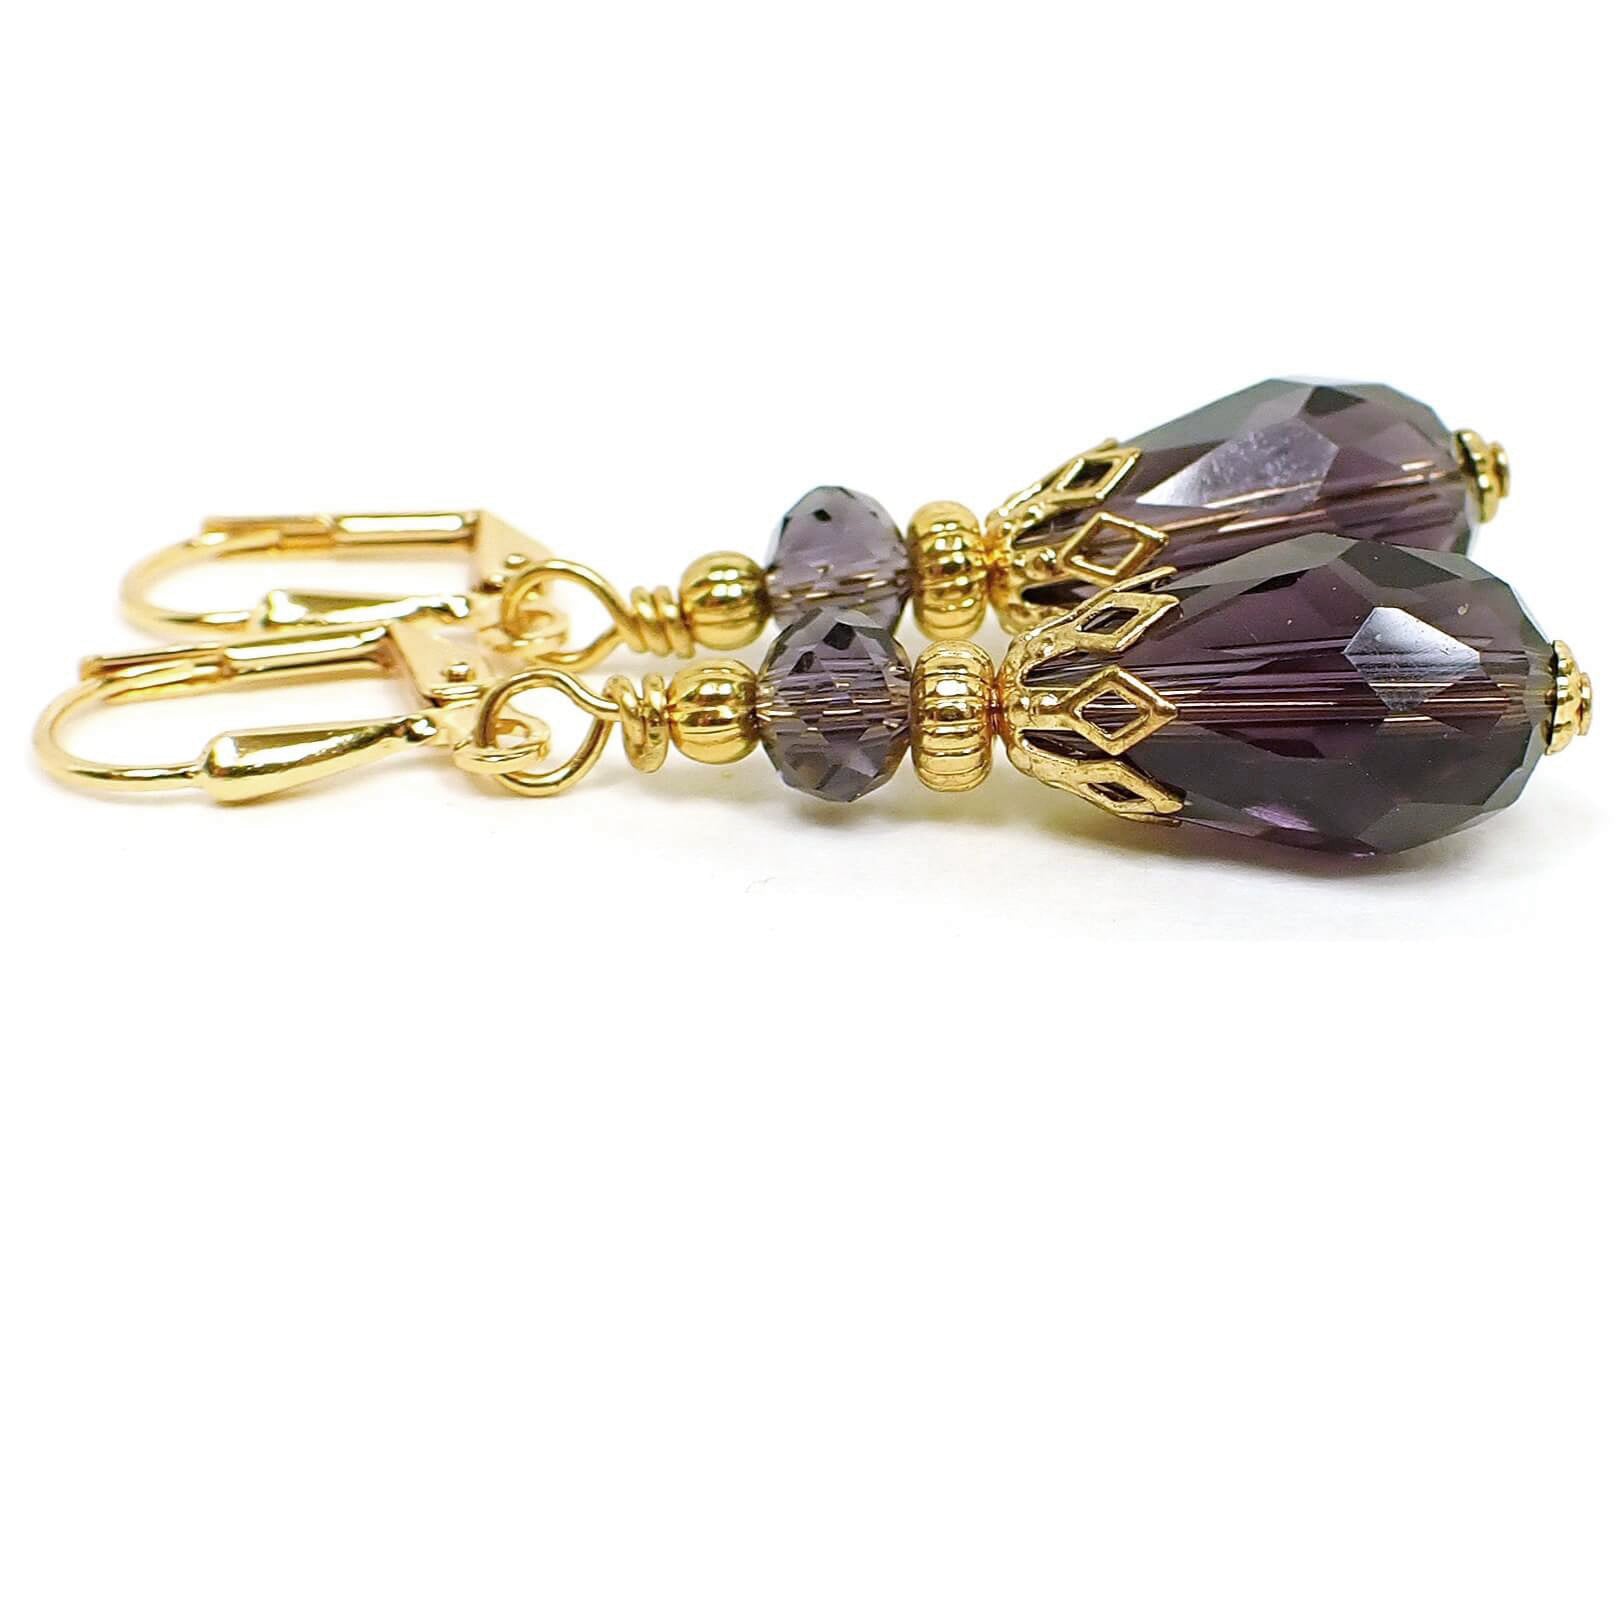 Side view of the handmade teardrop earrings. The metal is gold plated in color. The beads are faceted glass crystal in a grape candy color. The bottom beads are teardrop shaped.